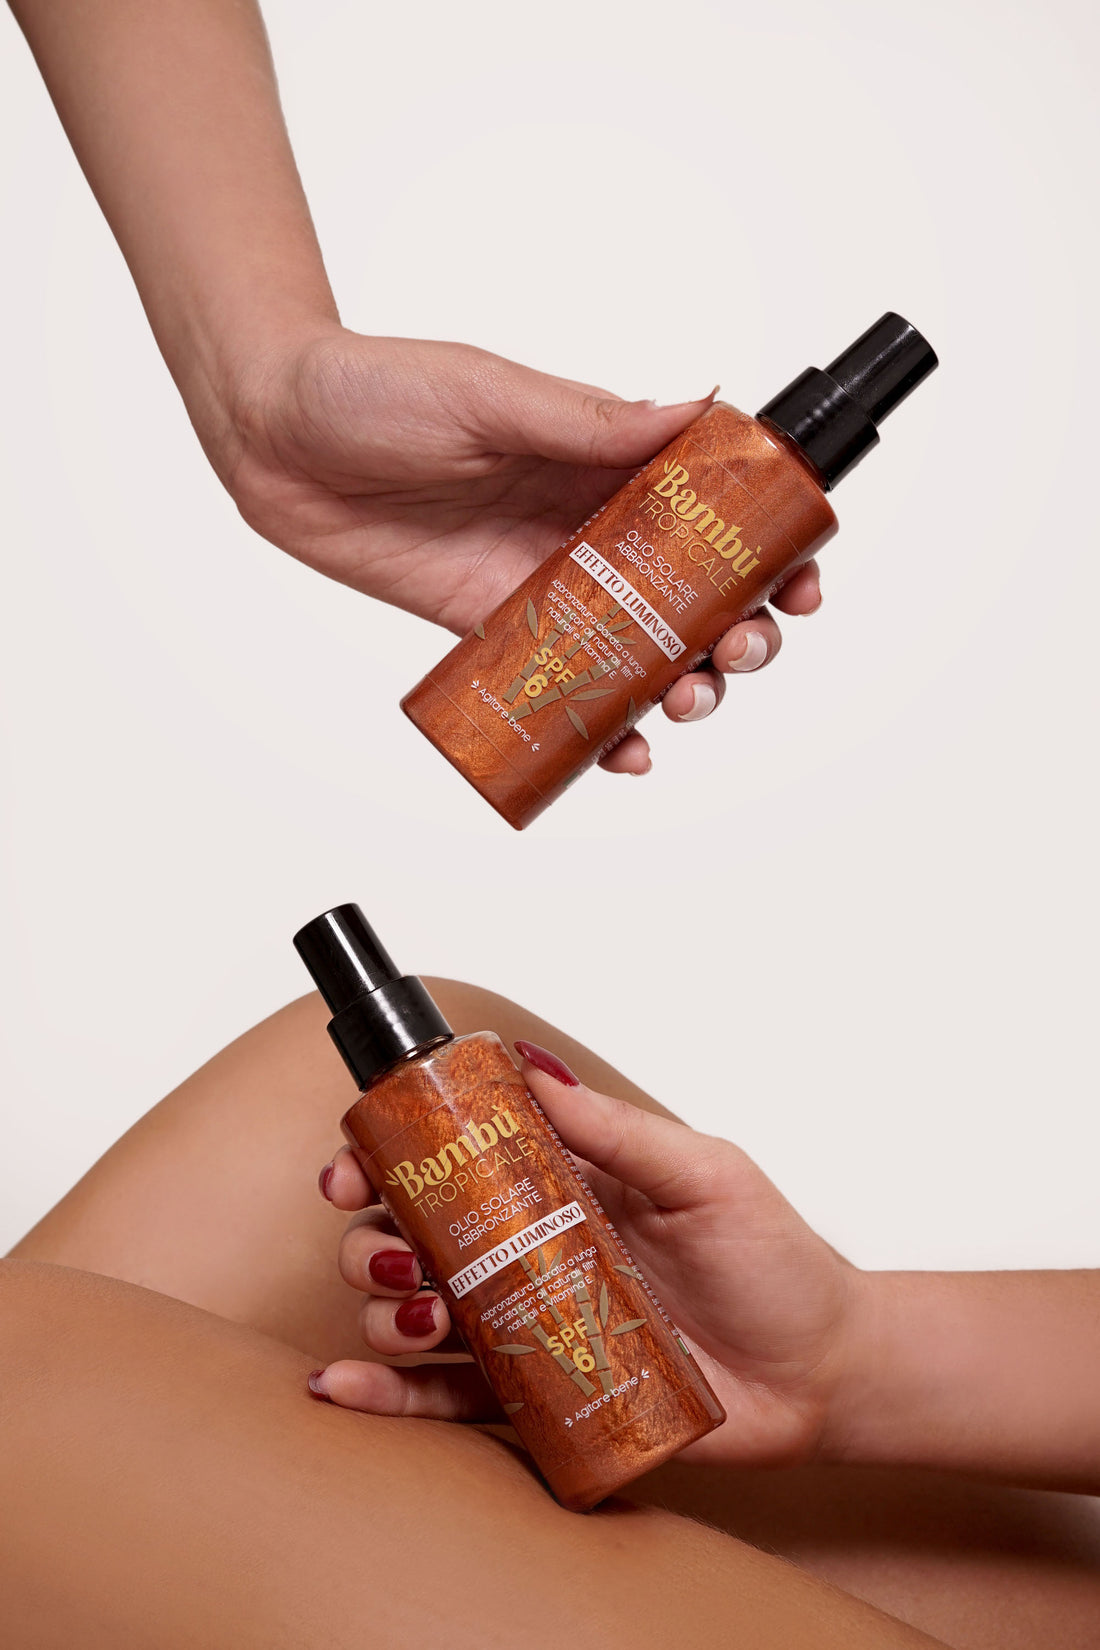 Are you ready to bask in the glorious sun and unlock a luminous tan that turns heads?